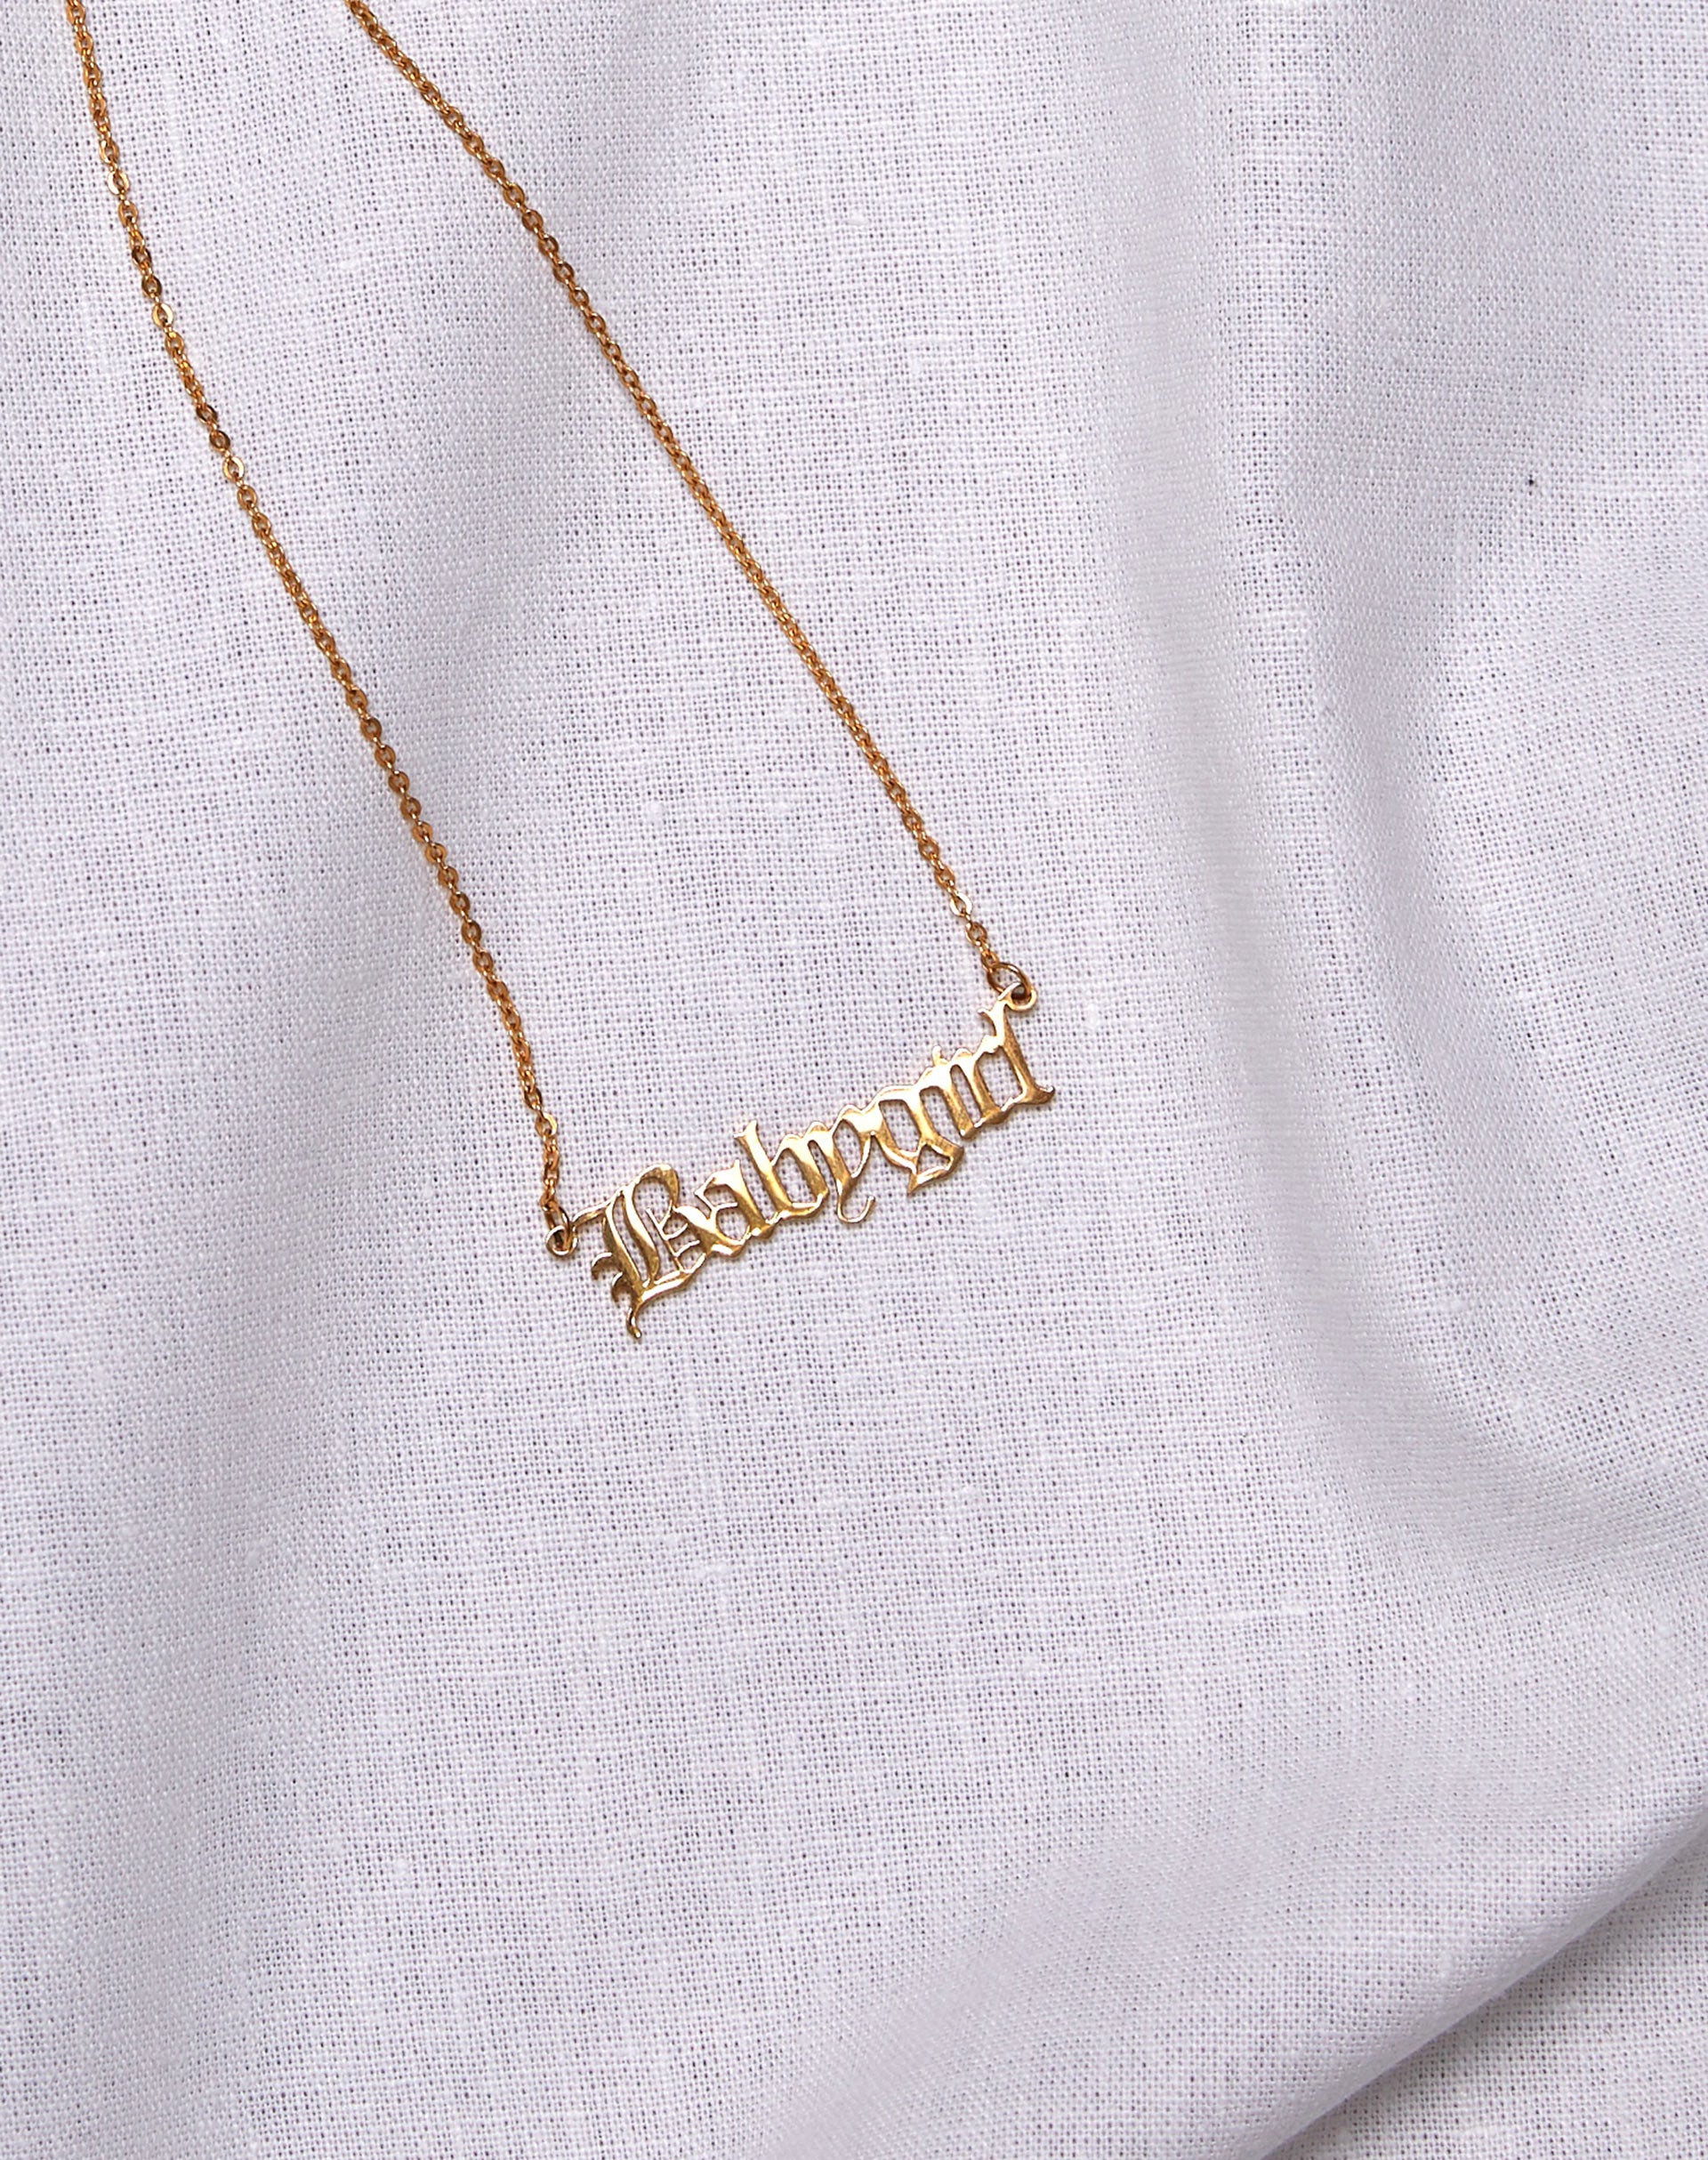 Image of Necklace in “Baby Girl” Gold